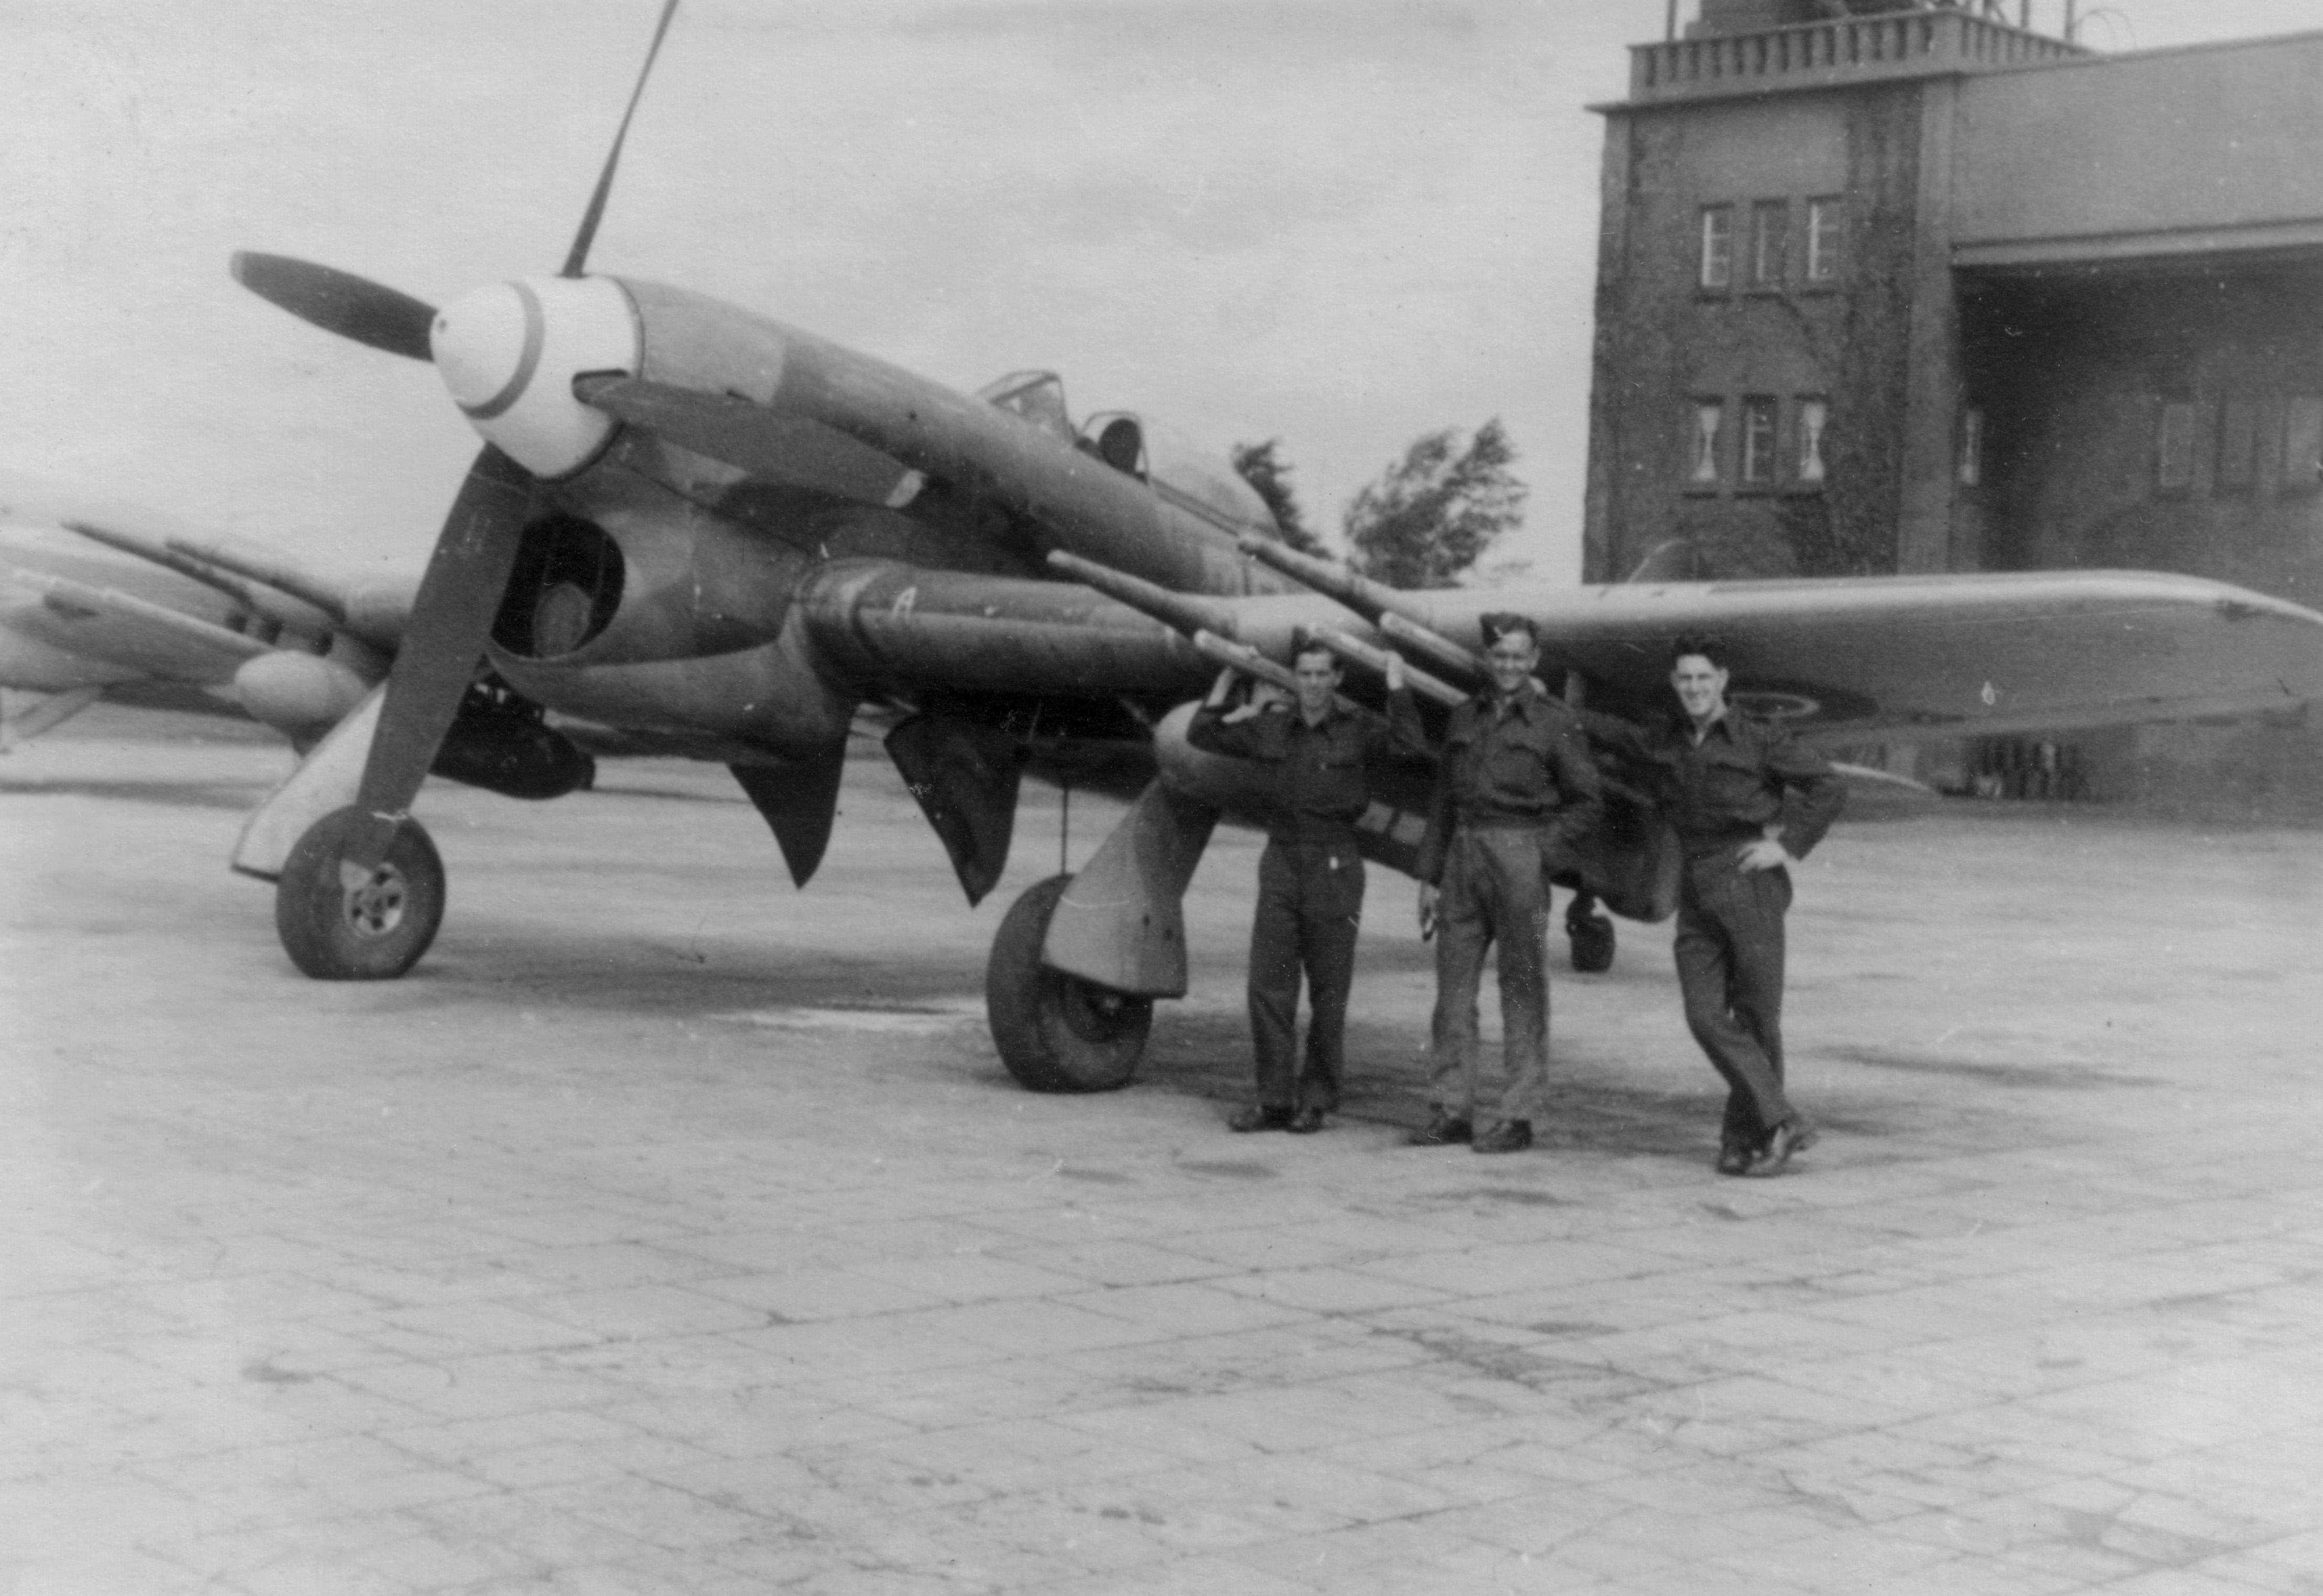 RAF Hawker Typhoon in the Netherlands in 1945: WWIIplanes